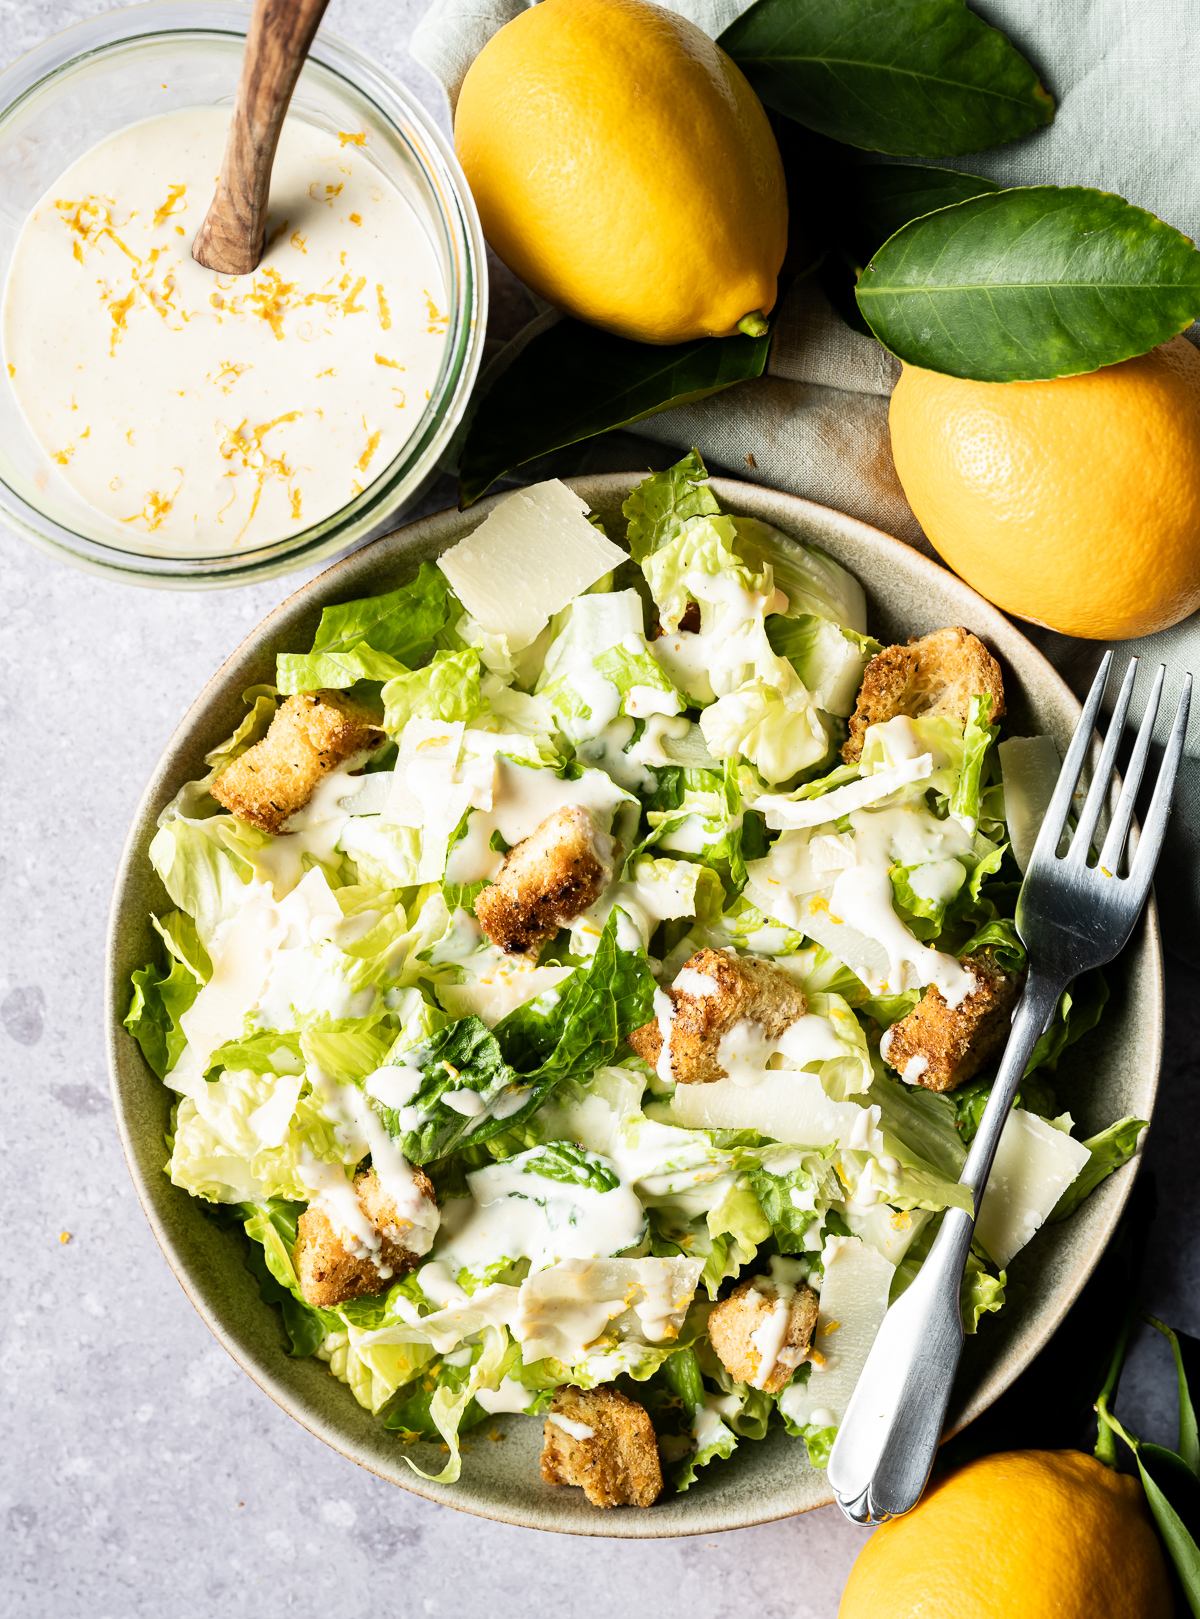 Bowl of lettuce with croutons shaved Parmesan lemon zest and Caesar dressing drizzled over it two whole meyer lemons jar of dressing